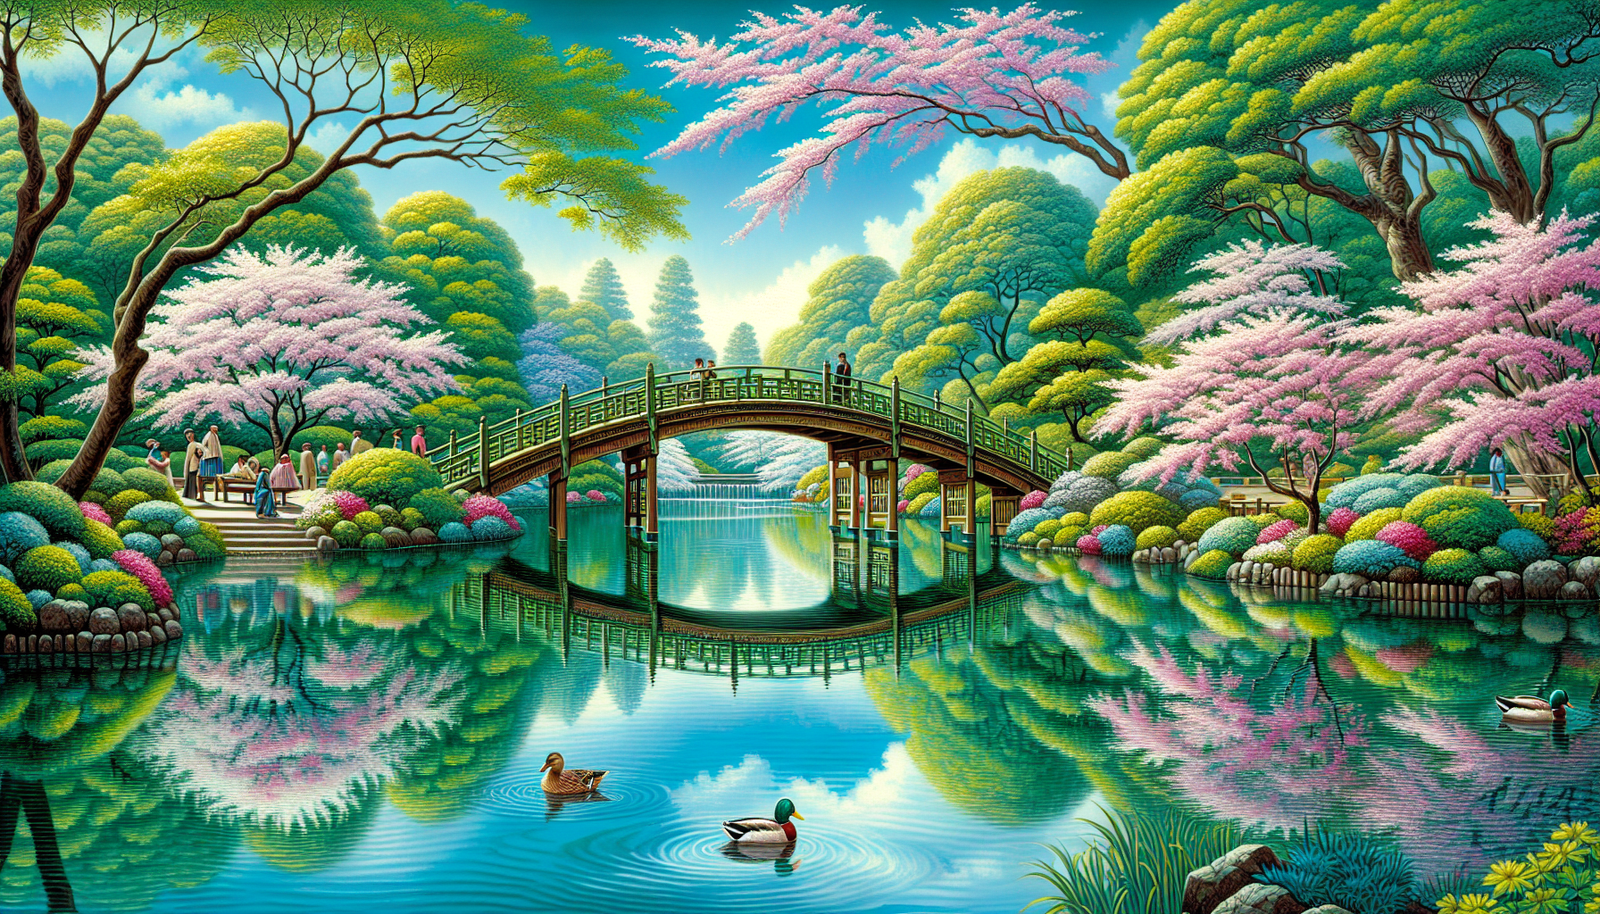 Illustration of Ohtaki Park and Duck Pond Bridge in Lake Cowichan